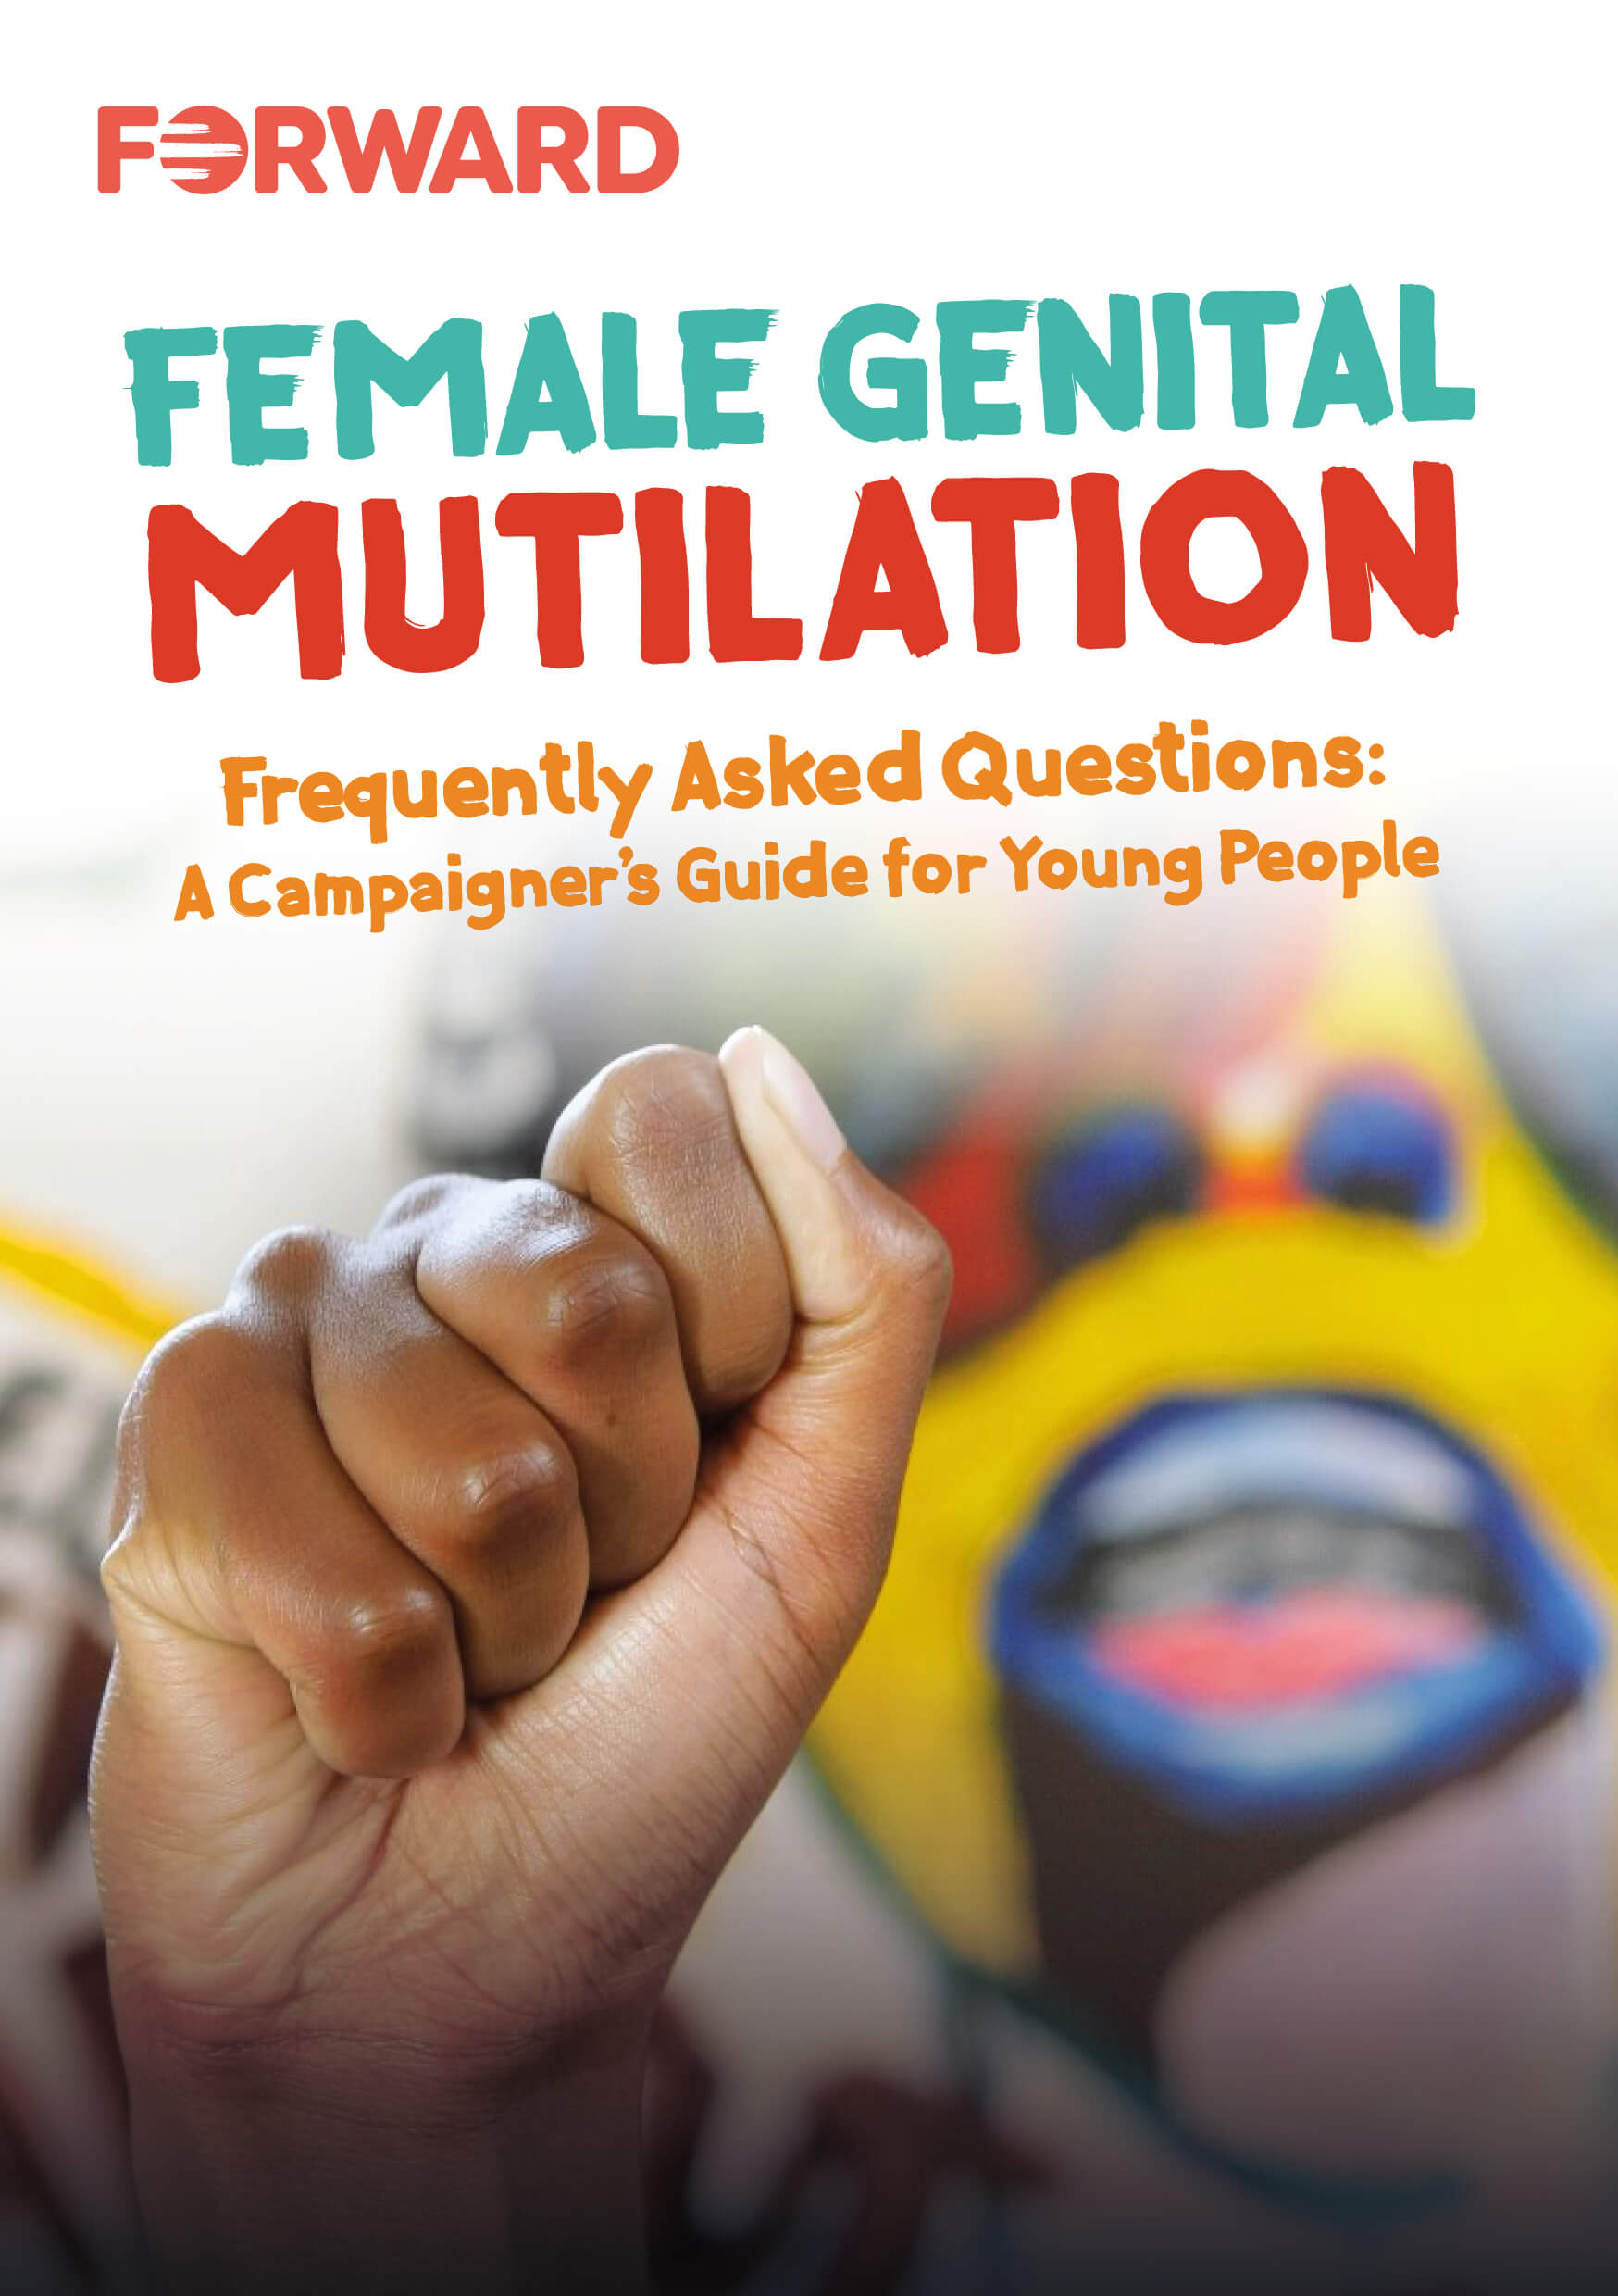 Frequently Asked Questions About FGM